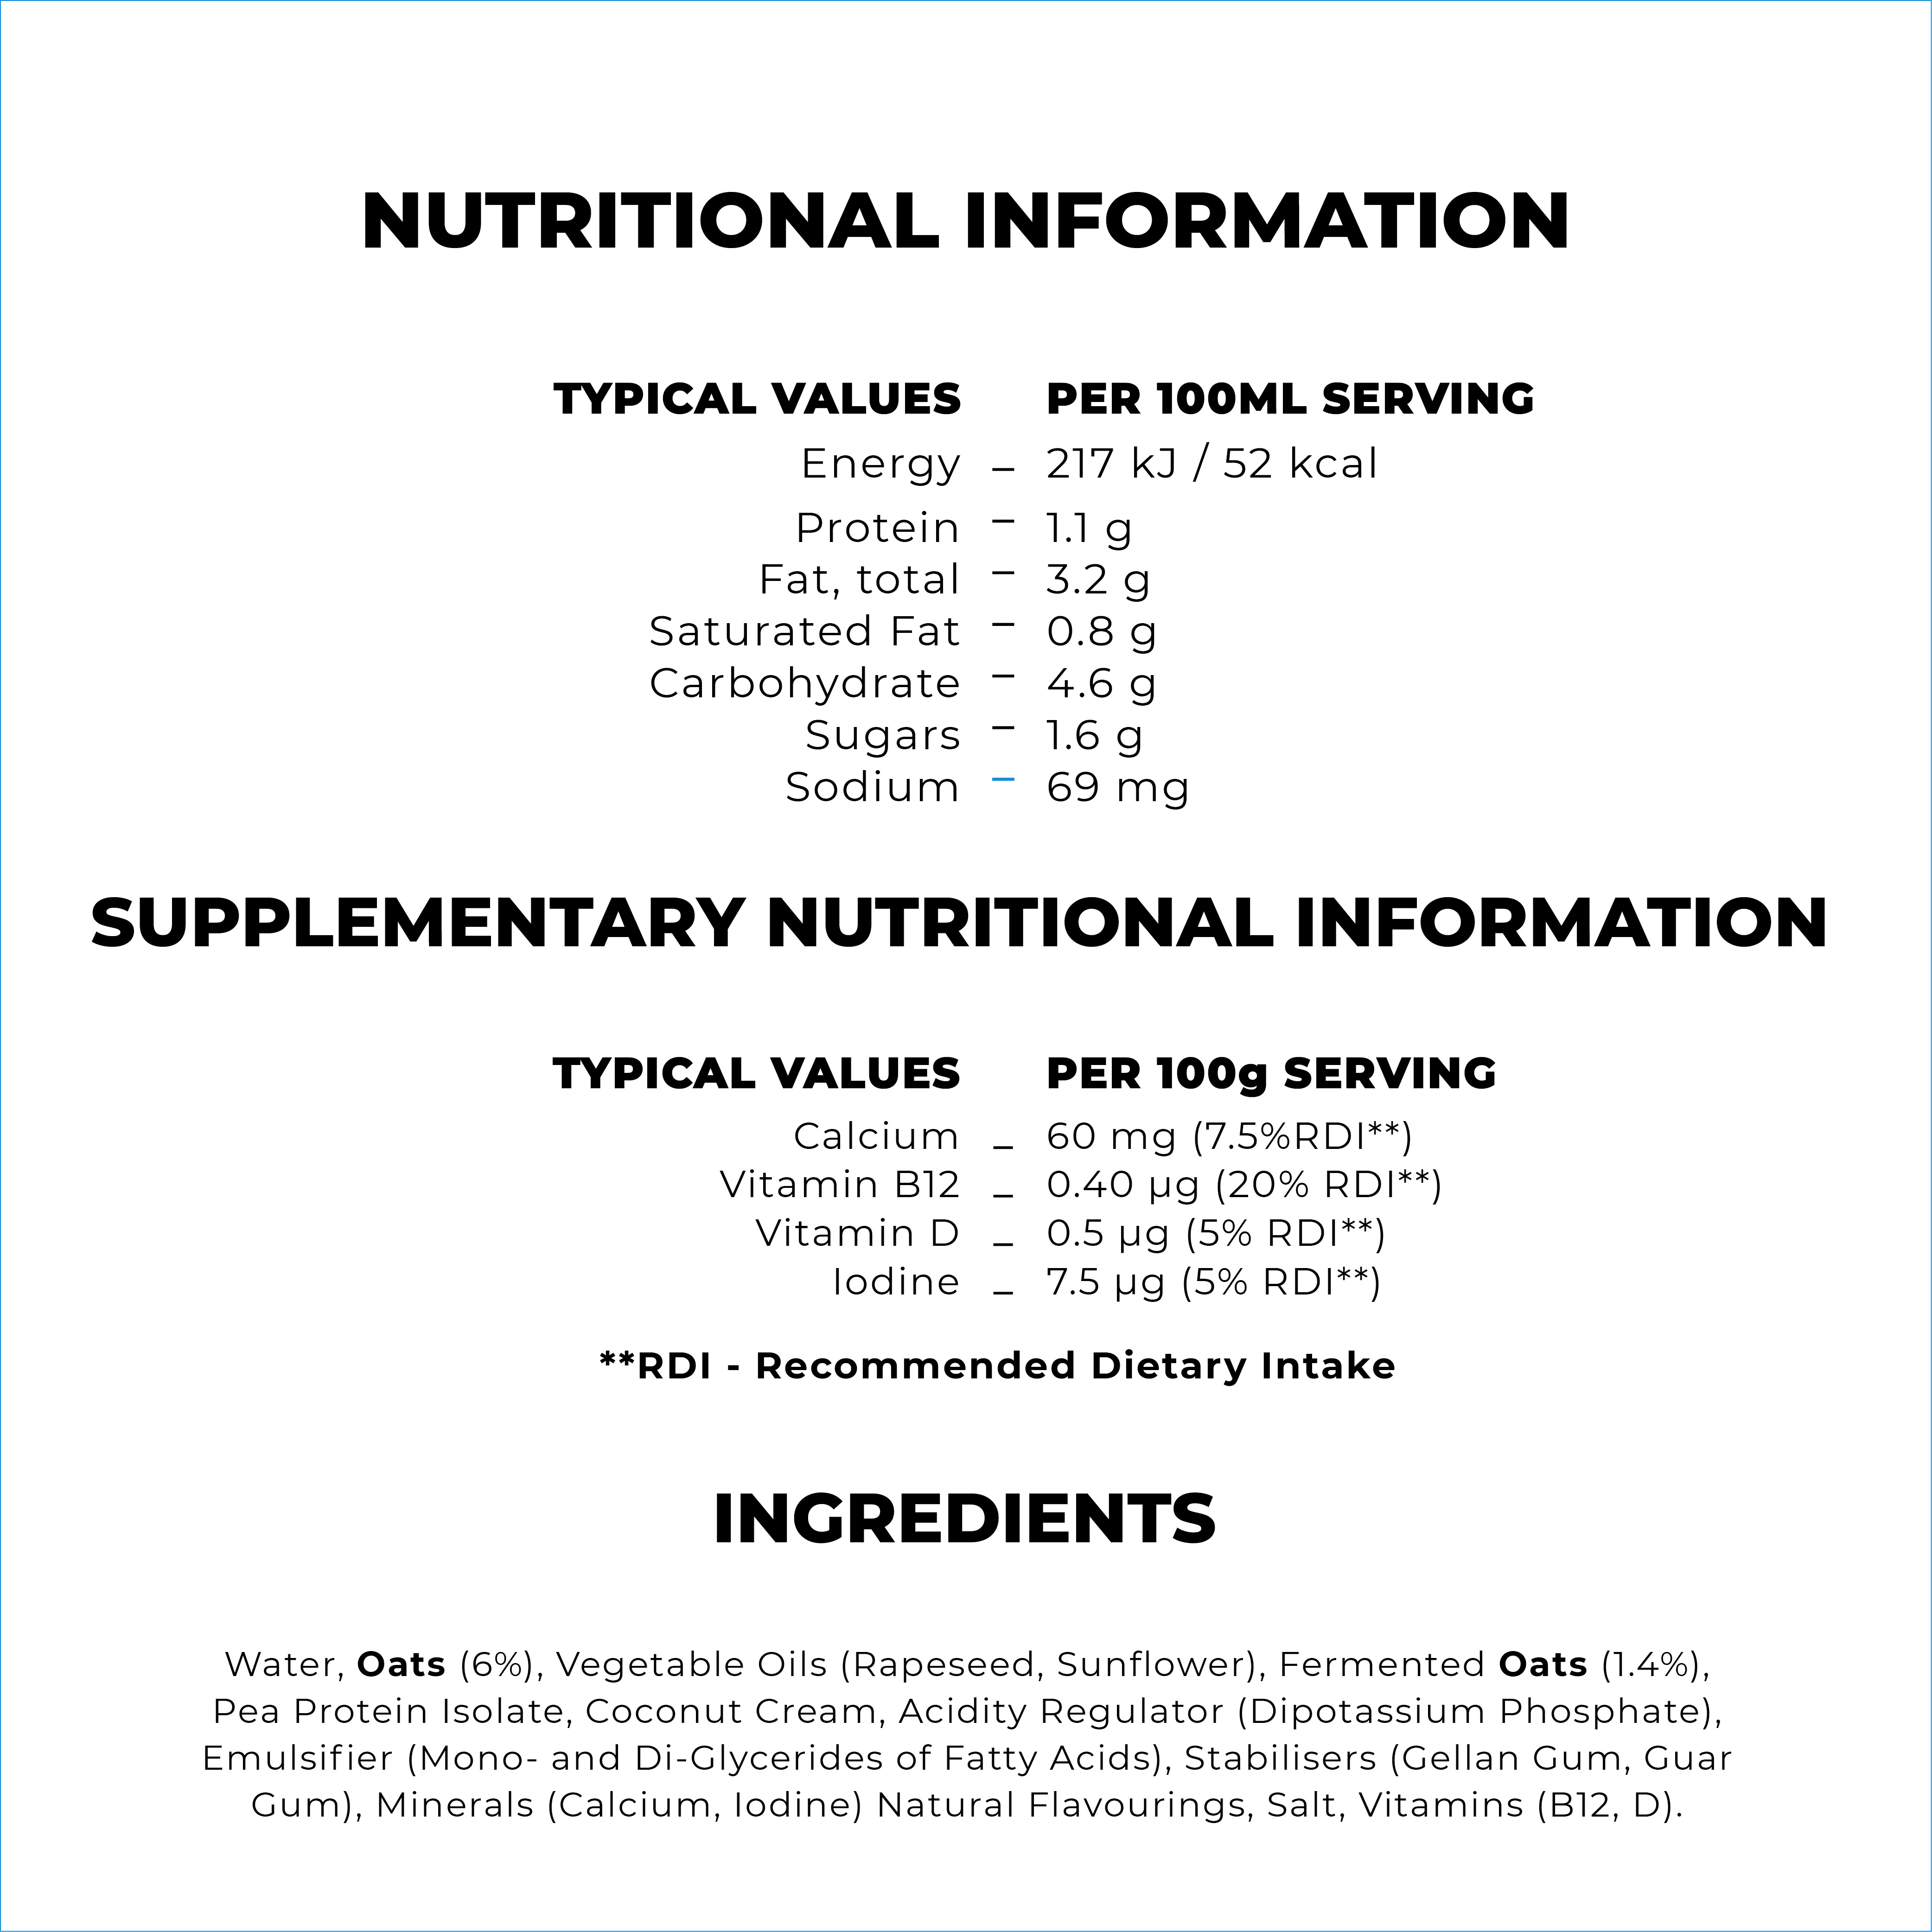 
                                  TYPICAL VALUES Energy Protein Fat, total Saturated Fat Carbohydrate Sugars Sodium 
                                  PER 100ML SERVING 217 kJ / 52 kcal 1.1 g - 3.2 g 0.8 g 4.6 g 1.6 g 69 mg 
                                  CUPPLEMENTARY NUTRITIONAL INFORMATION 
                                  TYPICAL VALUES 
                                  Calcium _ Vitamin B12 _ Vitamin D _ Iodine _ 
                                  PER 100g SERVING 60 mg (7.5%RDI**) 0.40 pg (20% RDI**) 0.5 pg (5% RDI**) 7.5 pg (5% RDI**) 
                                  **RDI - Recommended Dietary Intake 

                                  Water, Oats (6%), Vegetable Oils (Rapeseed, Sunflower), Fermented Oats (1.4%), Pea Protein Isolate, Coconut Cream, Acidity Regulator (Dipotassium Phosphate), Emulsifier (Mono- and Di-Glycerides of Fatty Acids), Stabilisers (Gellan Gum, Guar Gum), Minerals (Calcium, Iodine) Natural Flavourings, Salt, Vitamins (B12, D). 
                                  